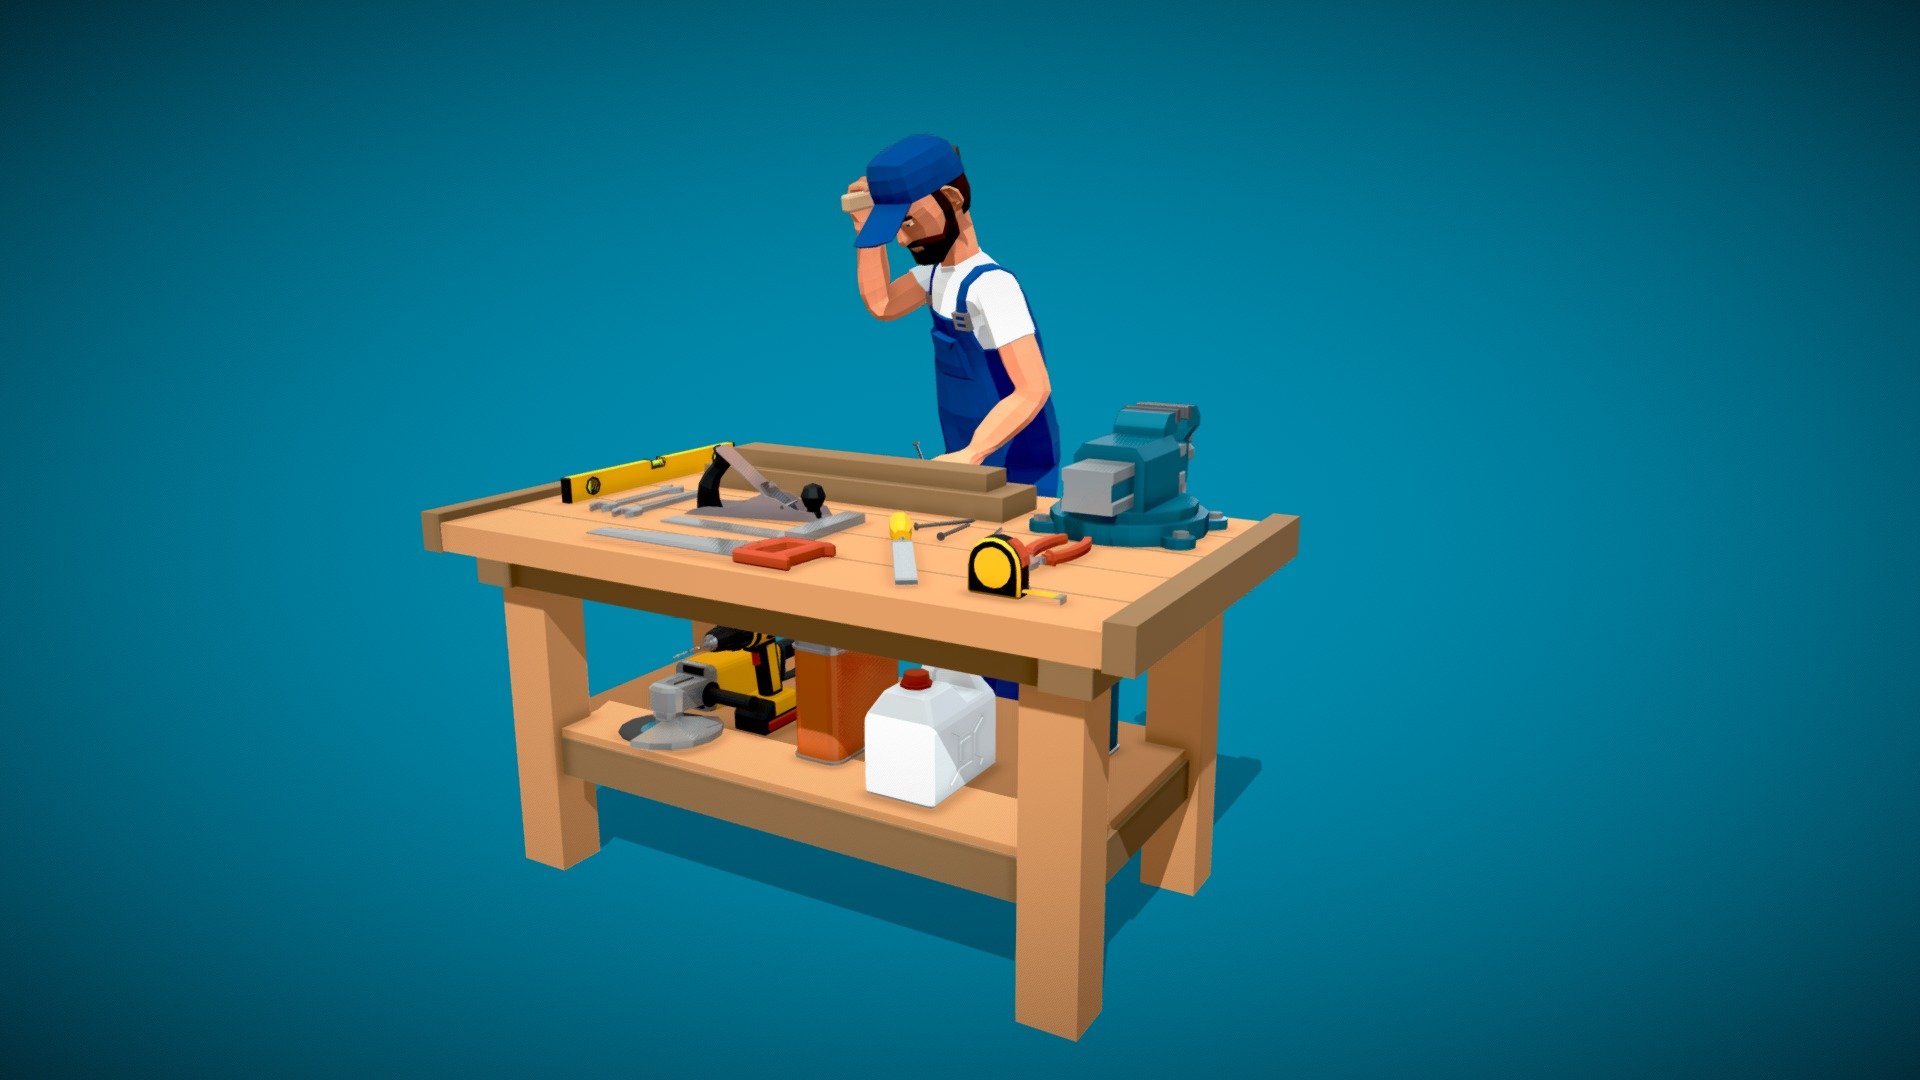 Low poly worker hammers a nail. Handyman works on a workbench with tools. 3d looped animation 3d model